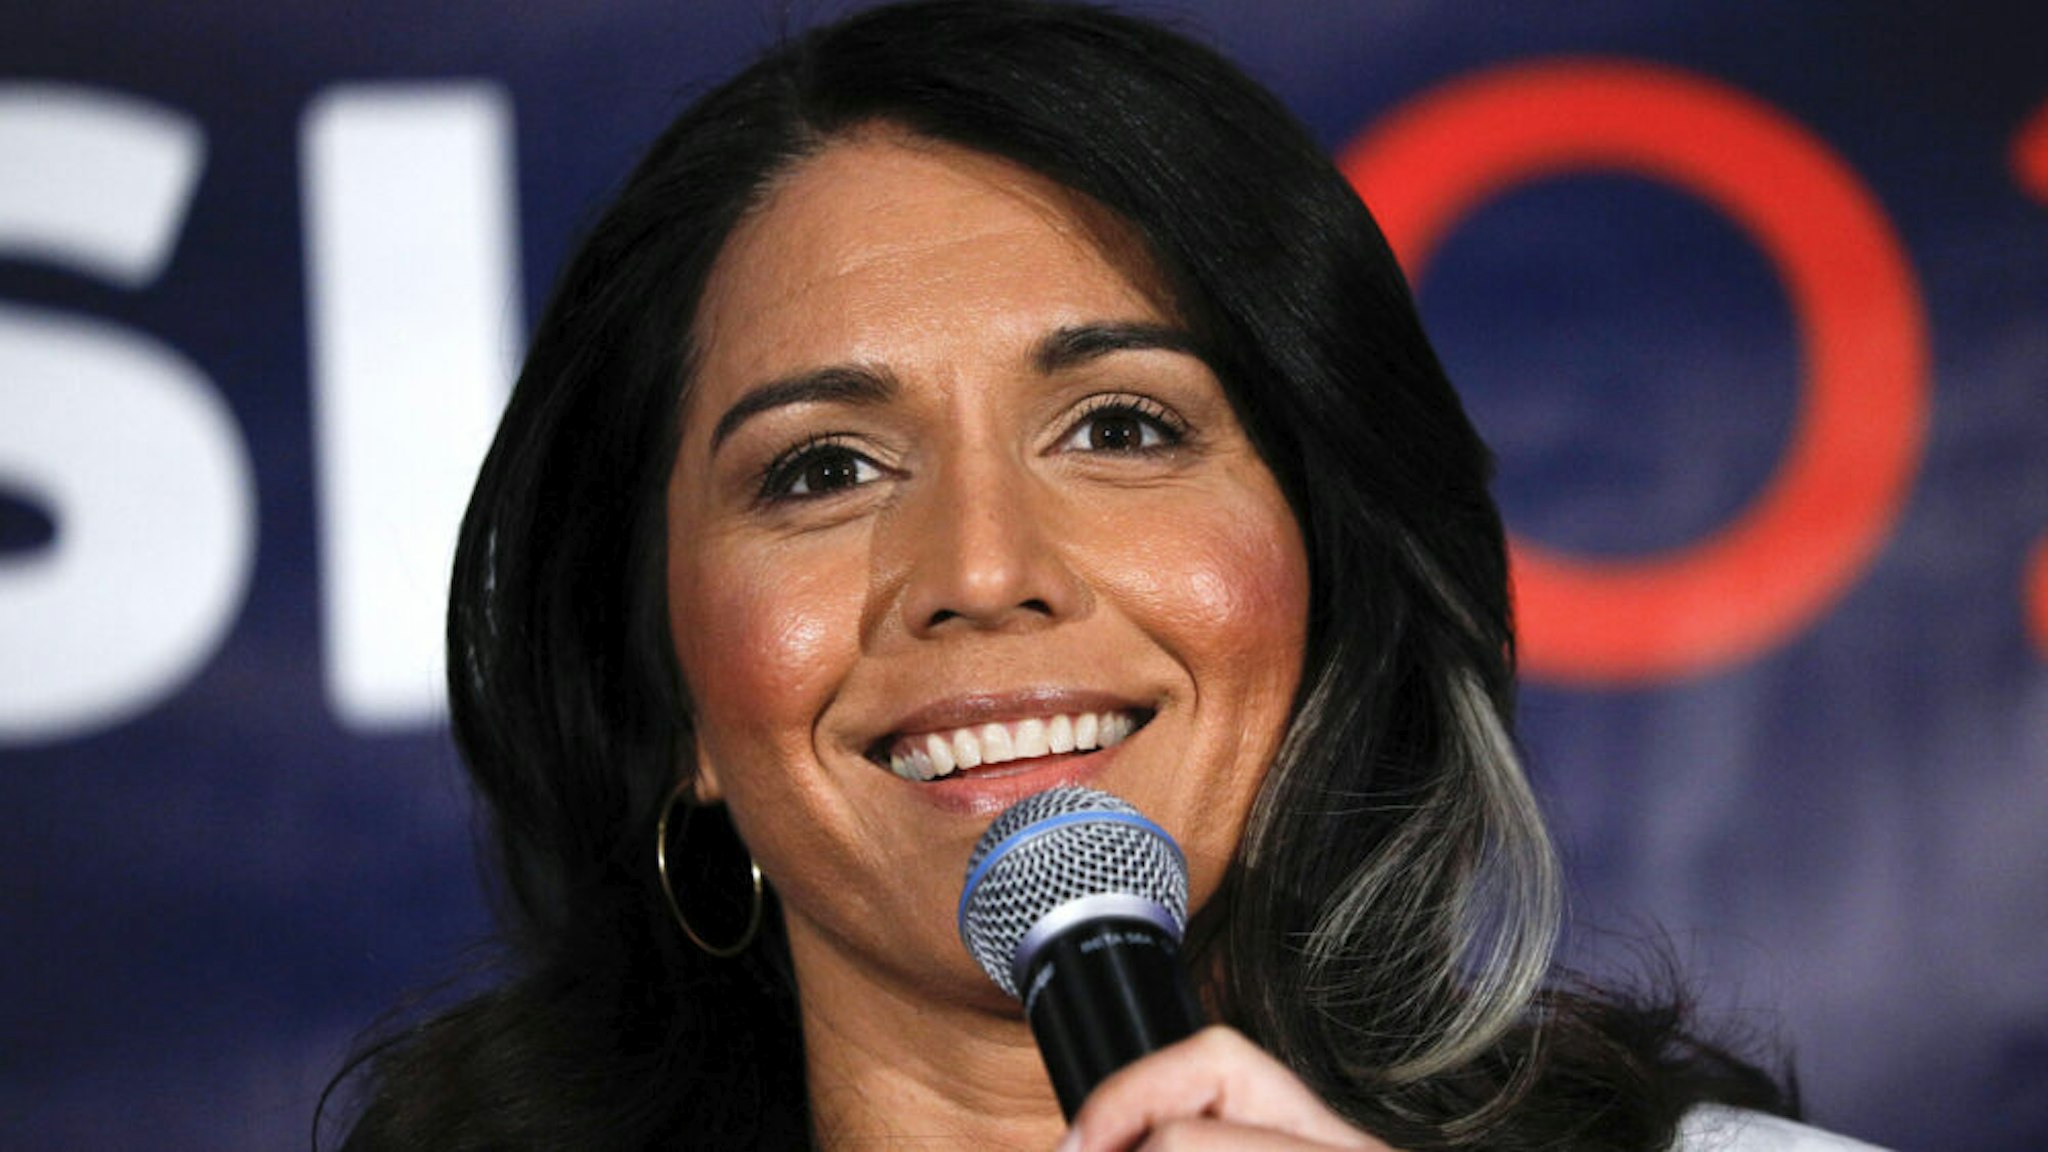 DETROIT, MI - MARCH 03: Democratic presidential candidate U.S. Representative Tulsi Gabbard (D-HI) holds a Town Hall meeting on Super Tuesday Primary night on March 3, 2020 in Detroit, Michigan. Gabbard, the first Samoan American and first Hindu elected to Congress, is one of two women left in the Democratic Primary, the other being Senator Elizabeth Warren.